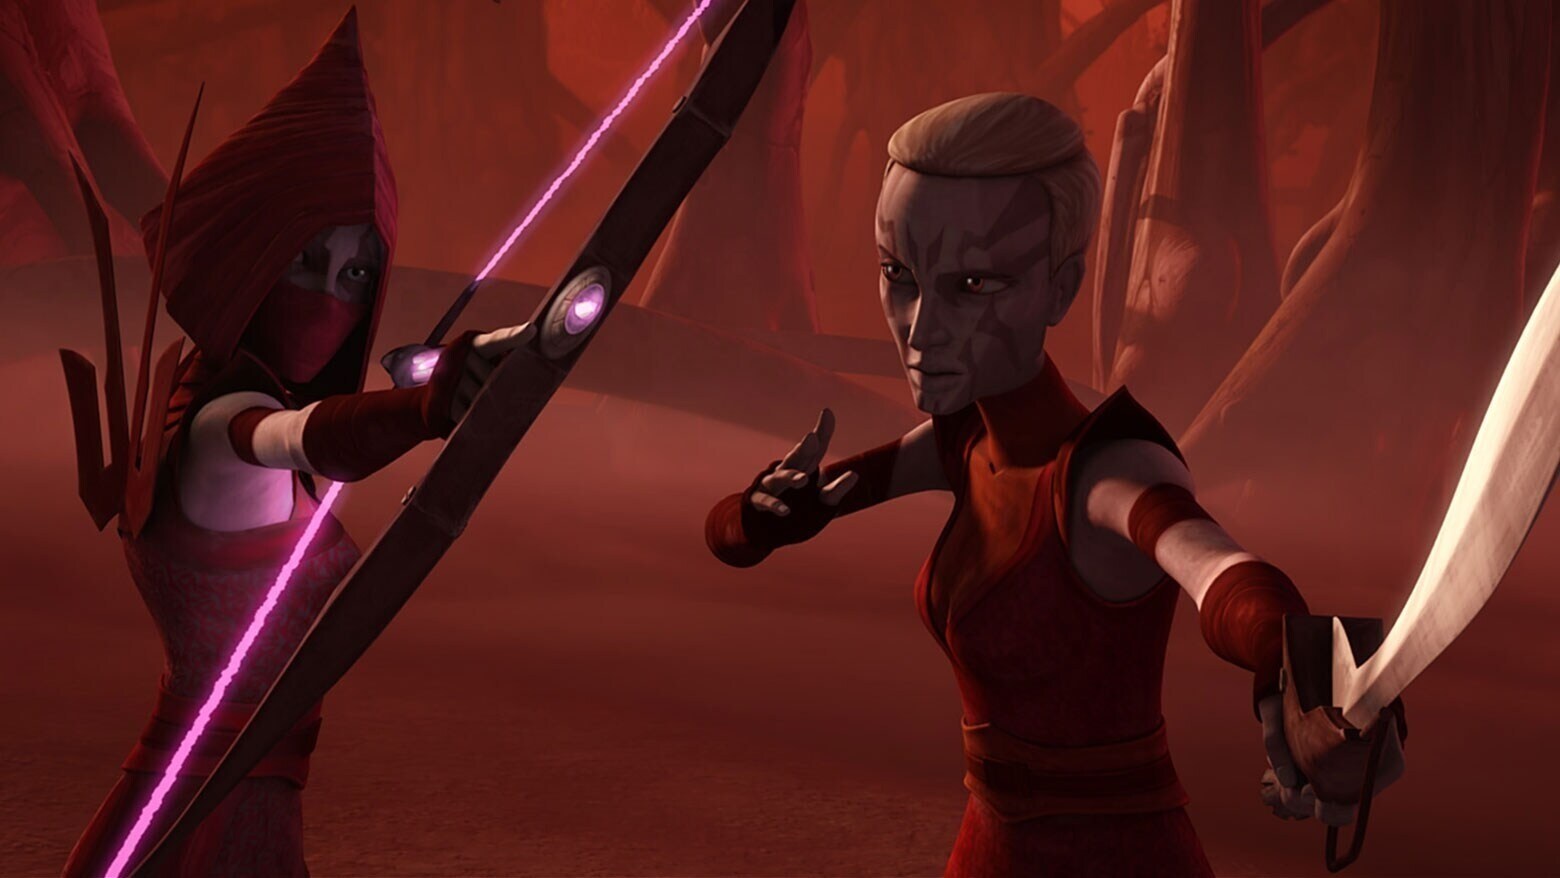 Asajj Ventress and a Nightsister from The Clone Wars episode, "Nightsisters"